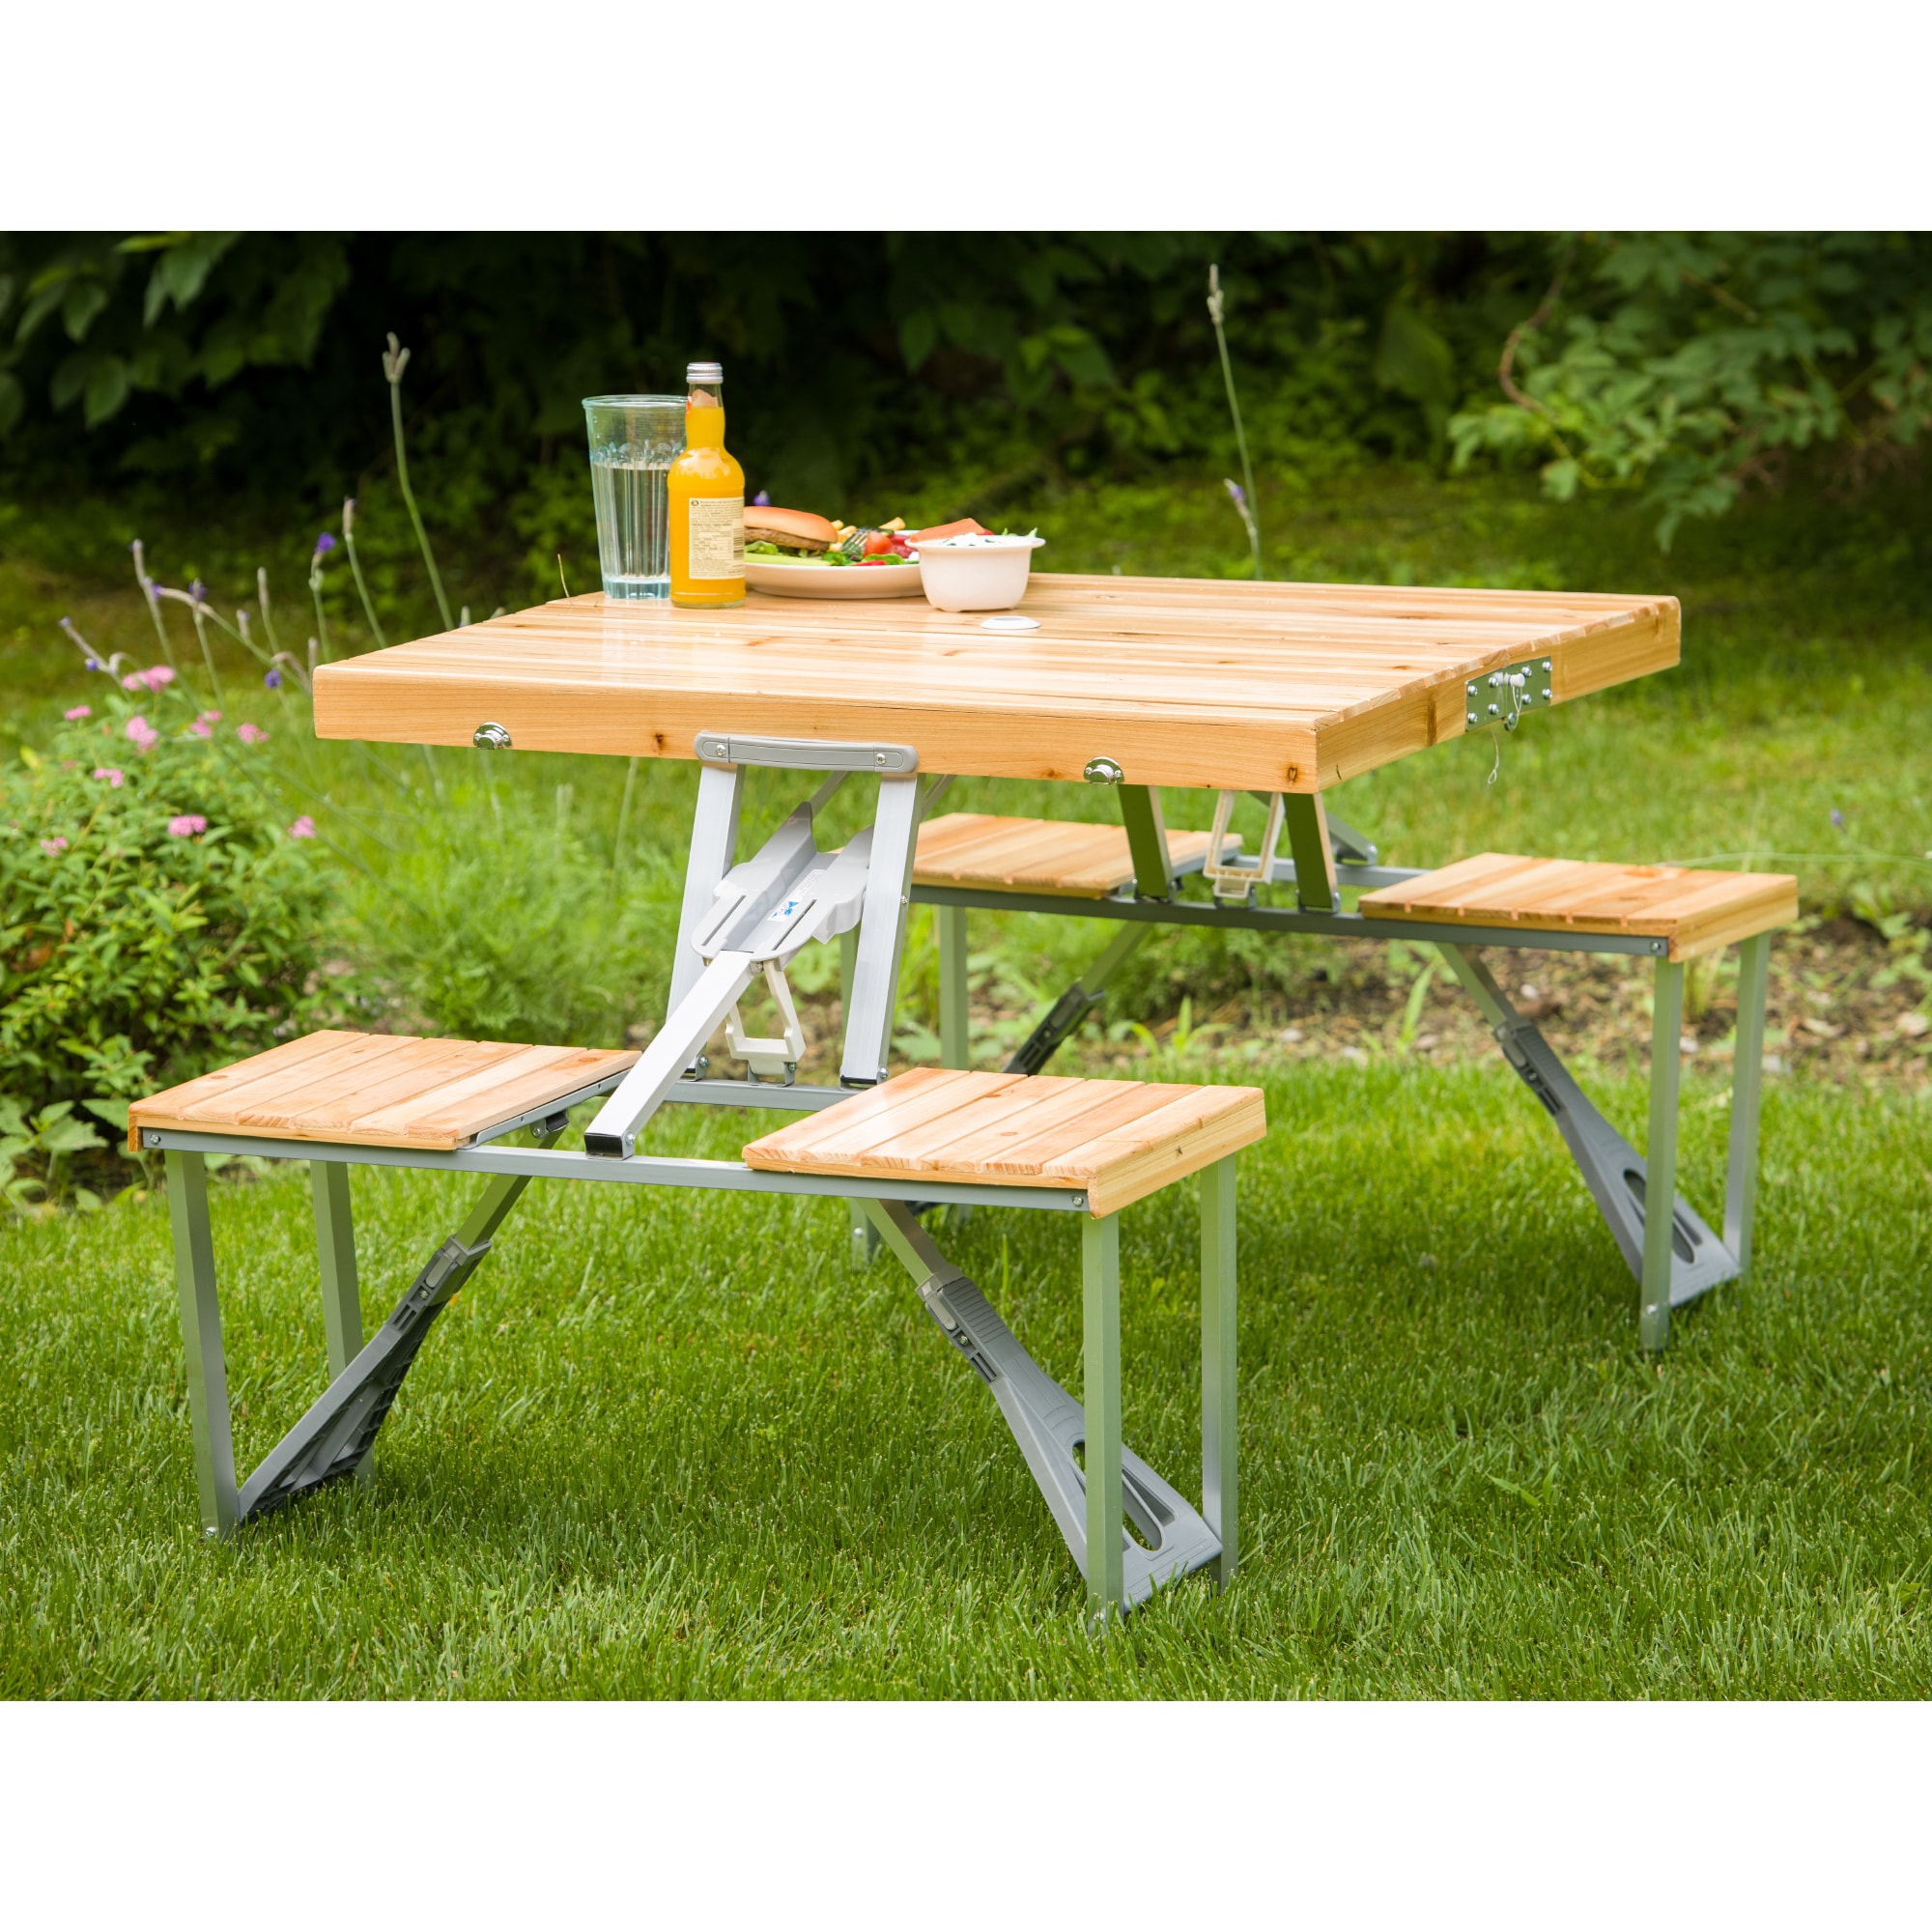 Portable Wooden Picnic Table & Seats Folding  Seats 4 Wood with Aluminum Frame 